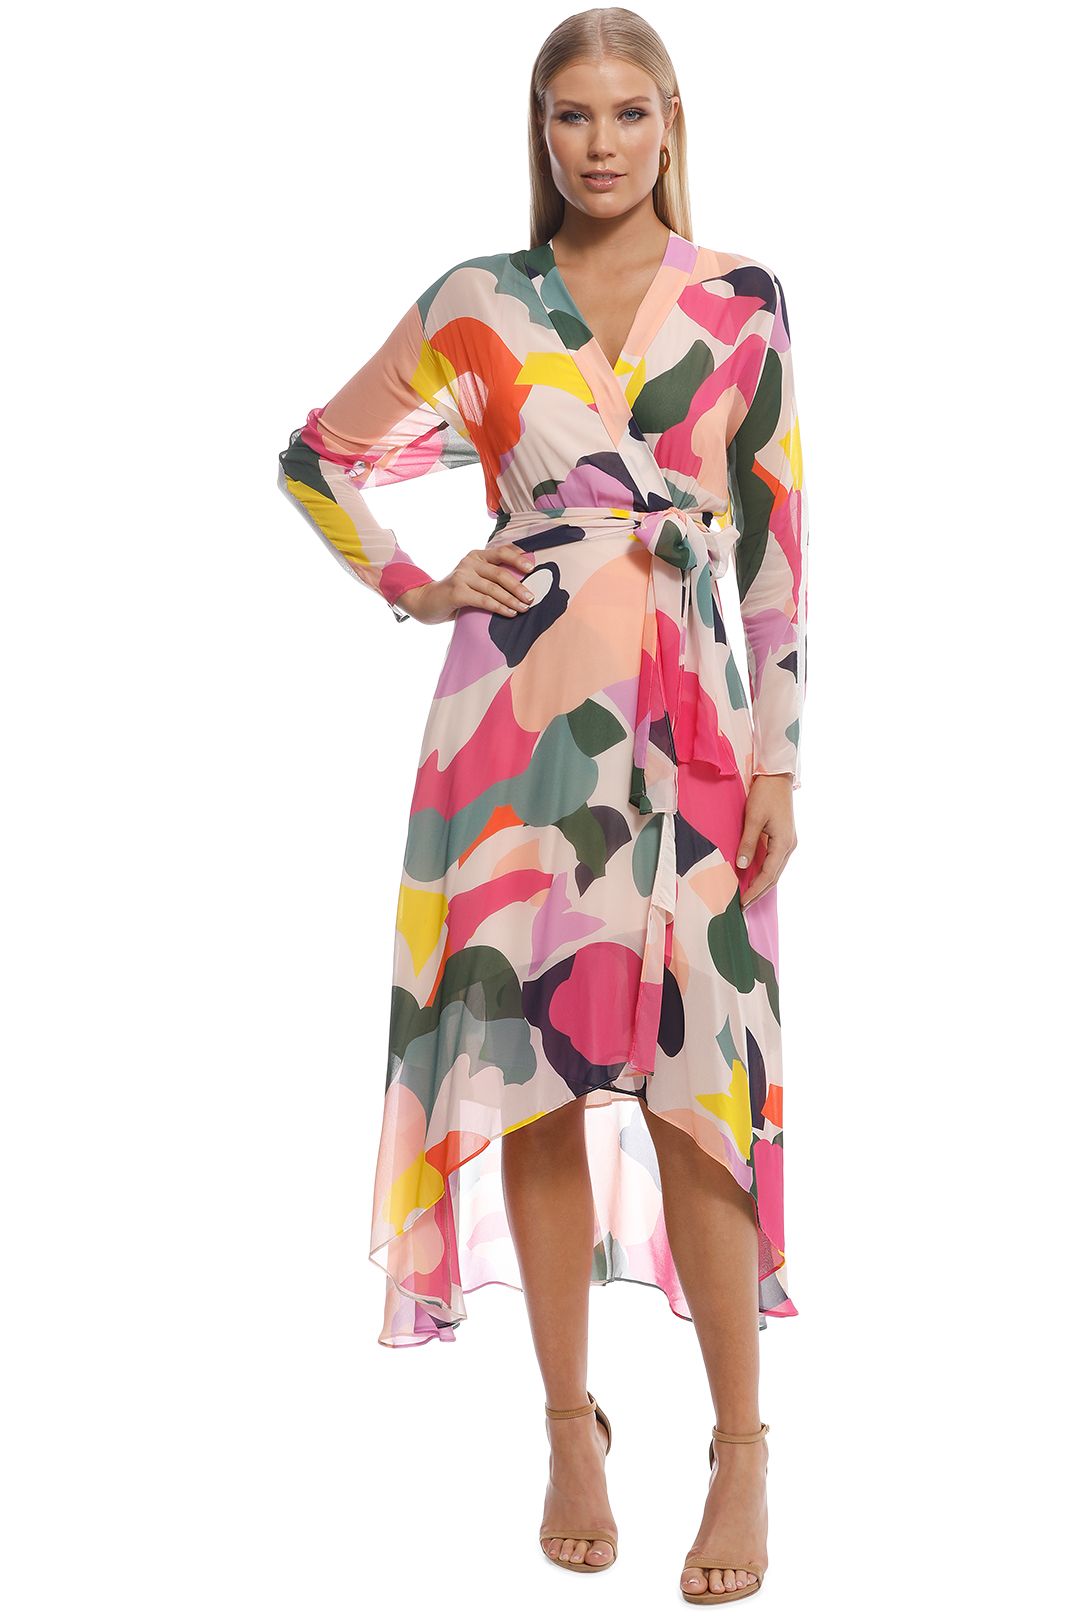 Chroma Wrap Dress - Multi by Ginger and Smart for Hire | GlamCorner